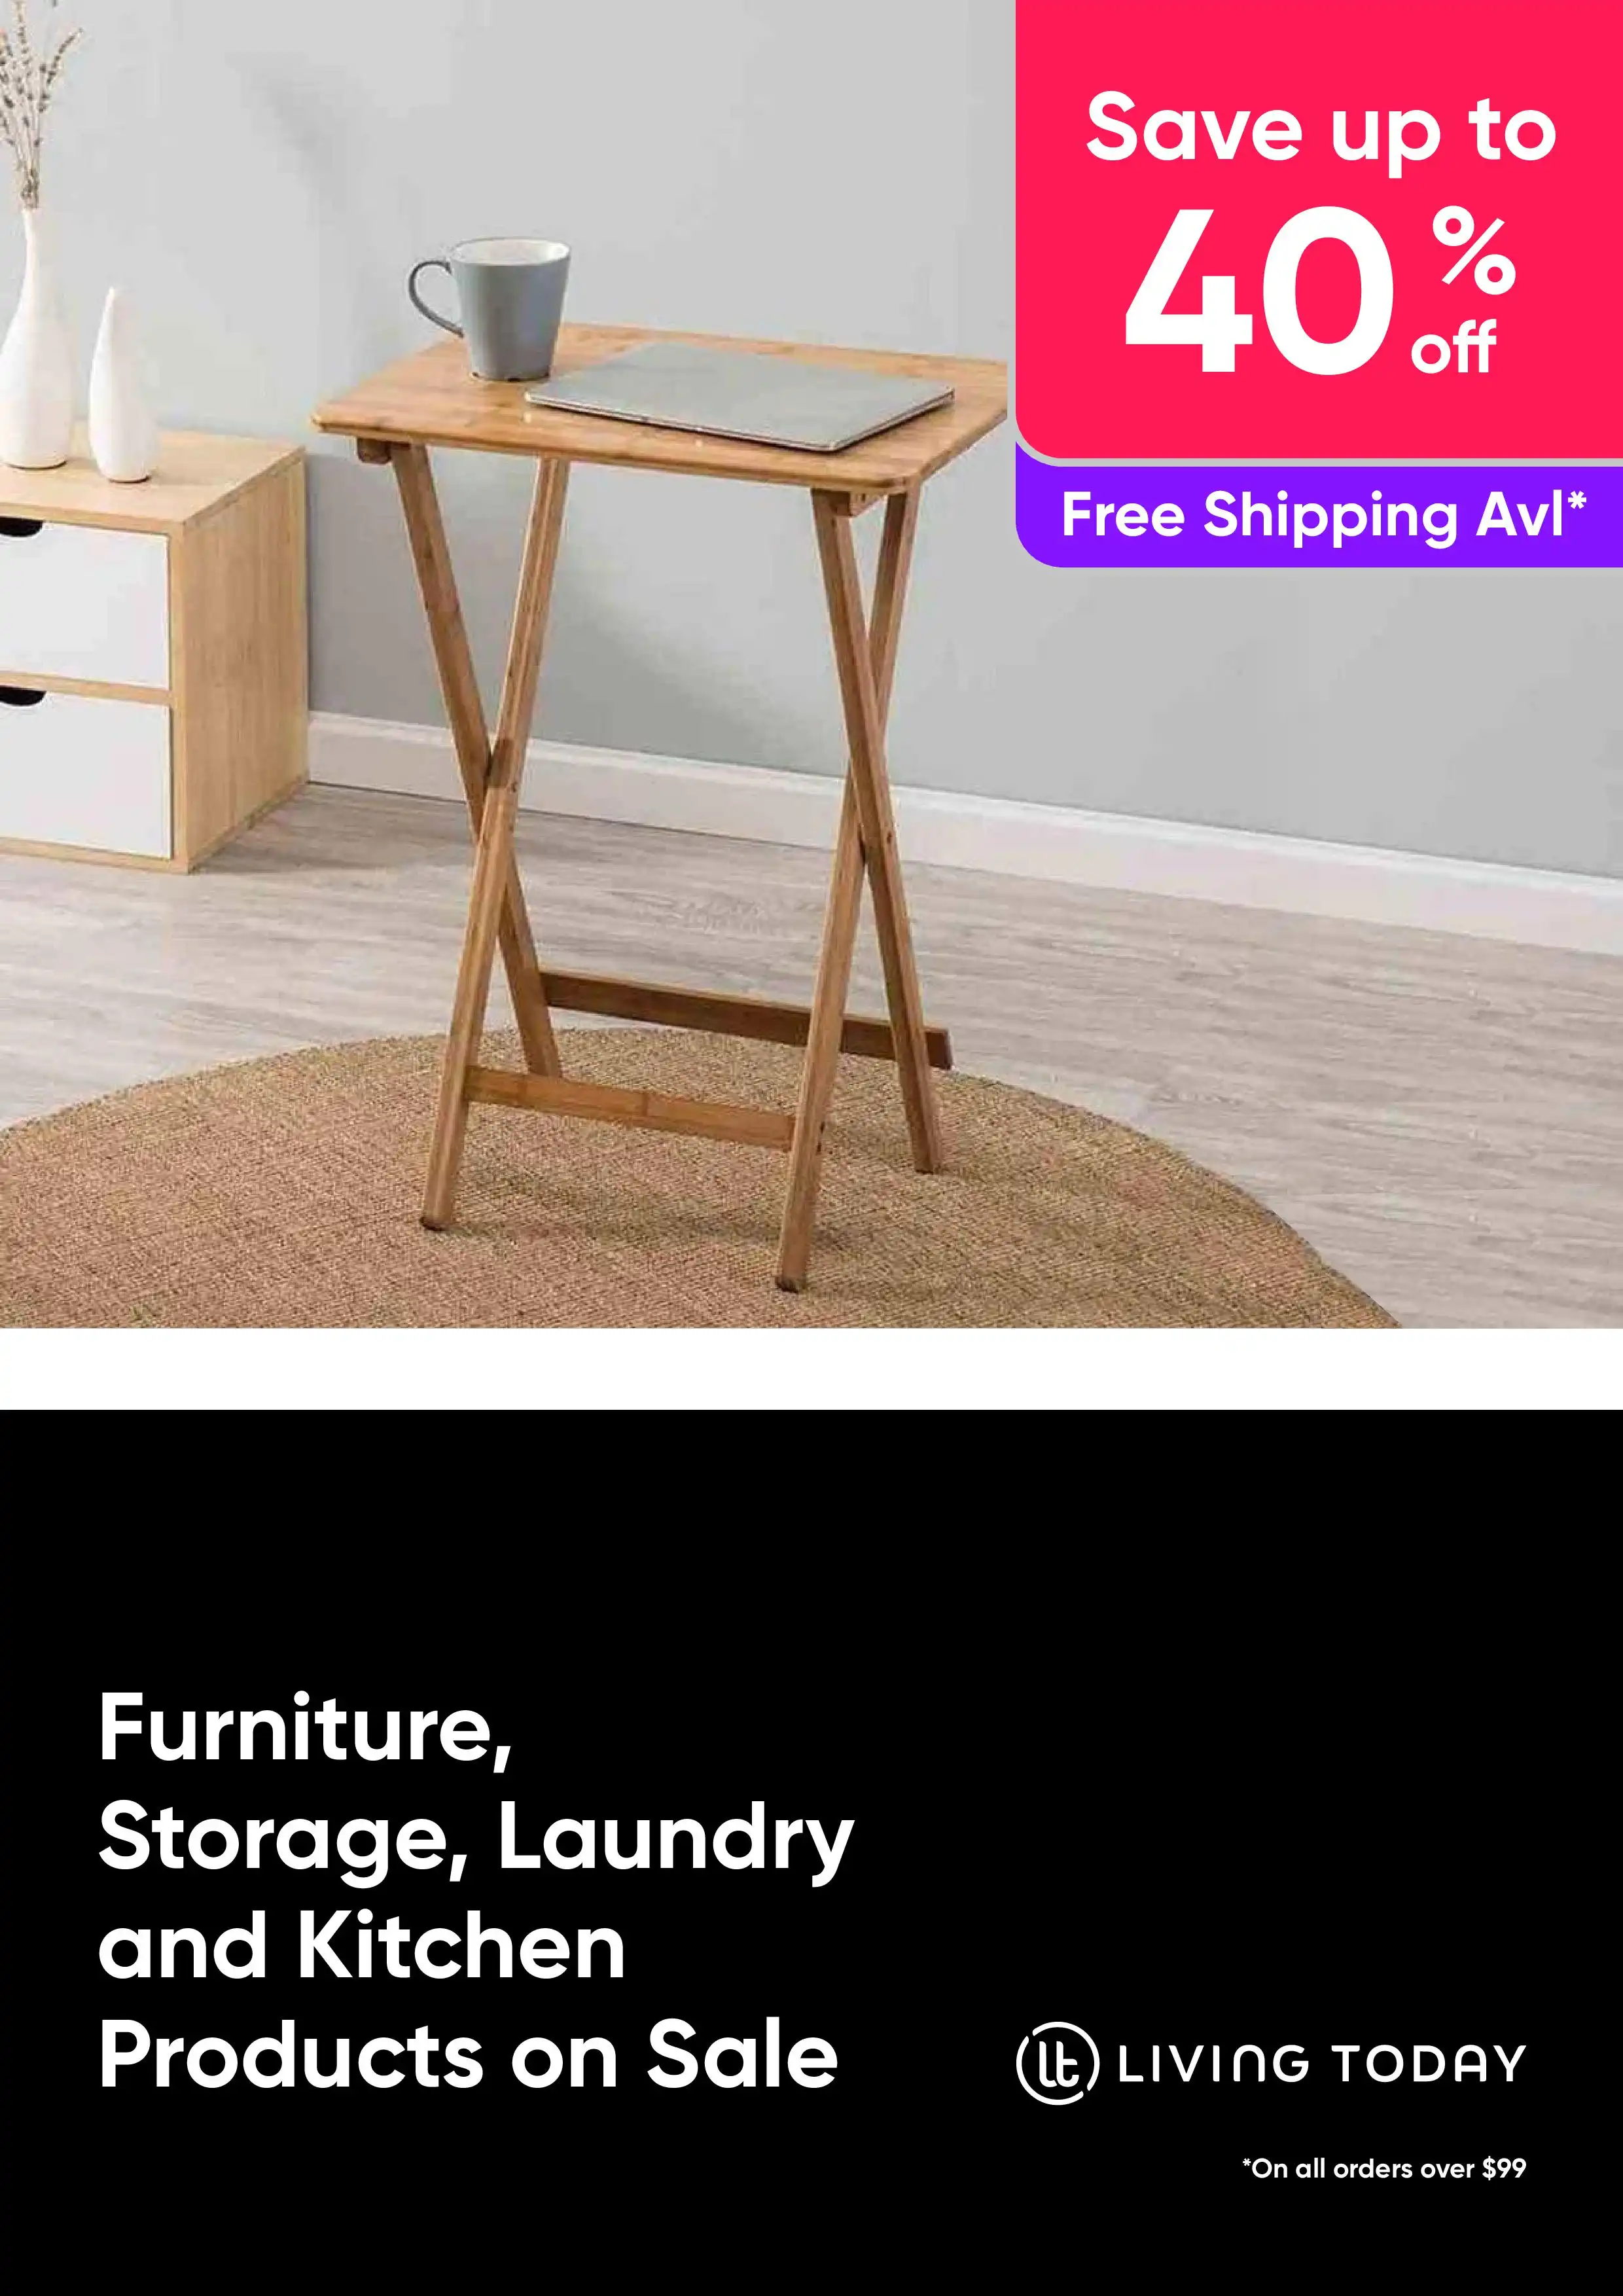 Shop Furniture, Storage, Laundry and Kitchen Products on Sale - Save up to 40% Off RRP